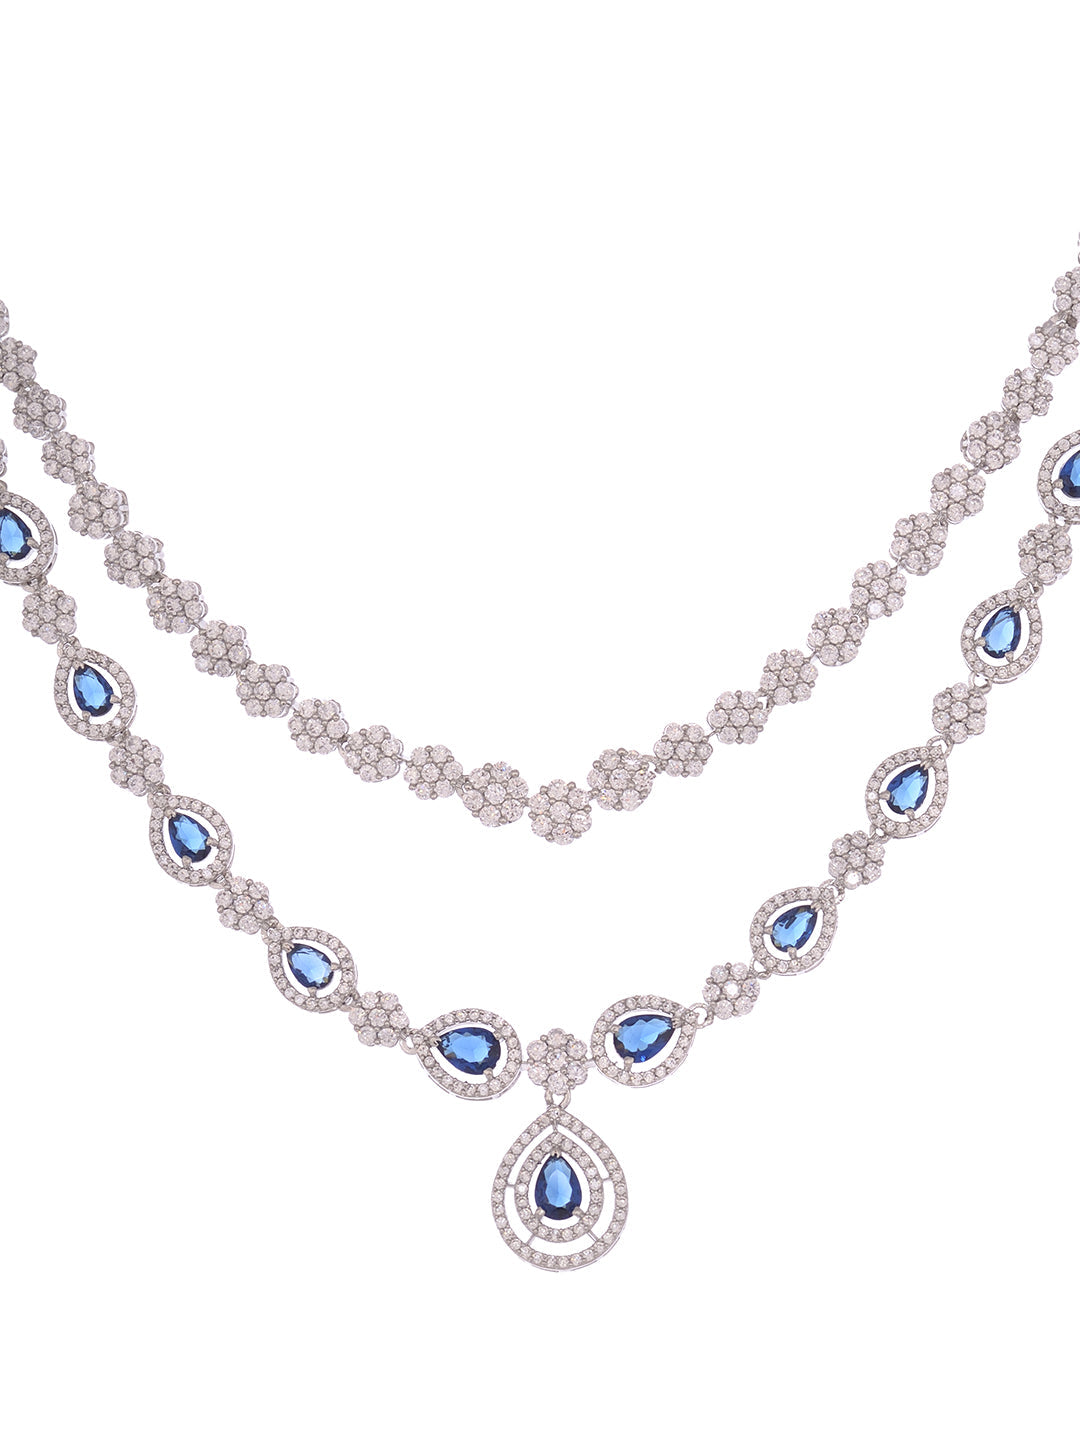 Silver Toned Blue AD studded double layer Necklace jewellery Set, zaveri pearls, sale price rs, sale price, sale gold plated, sale gold, sale, rubans, ring, regular price, priyassi jewellery,